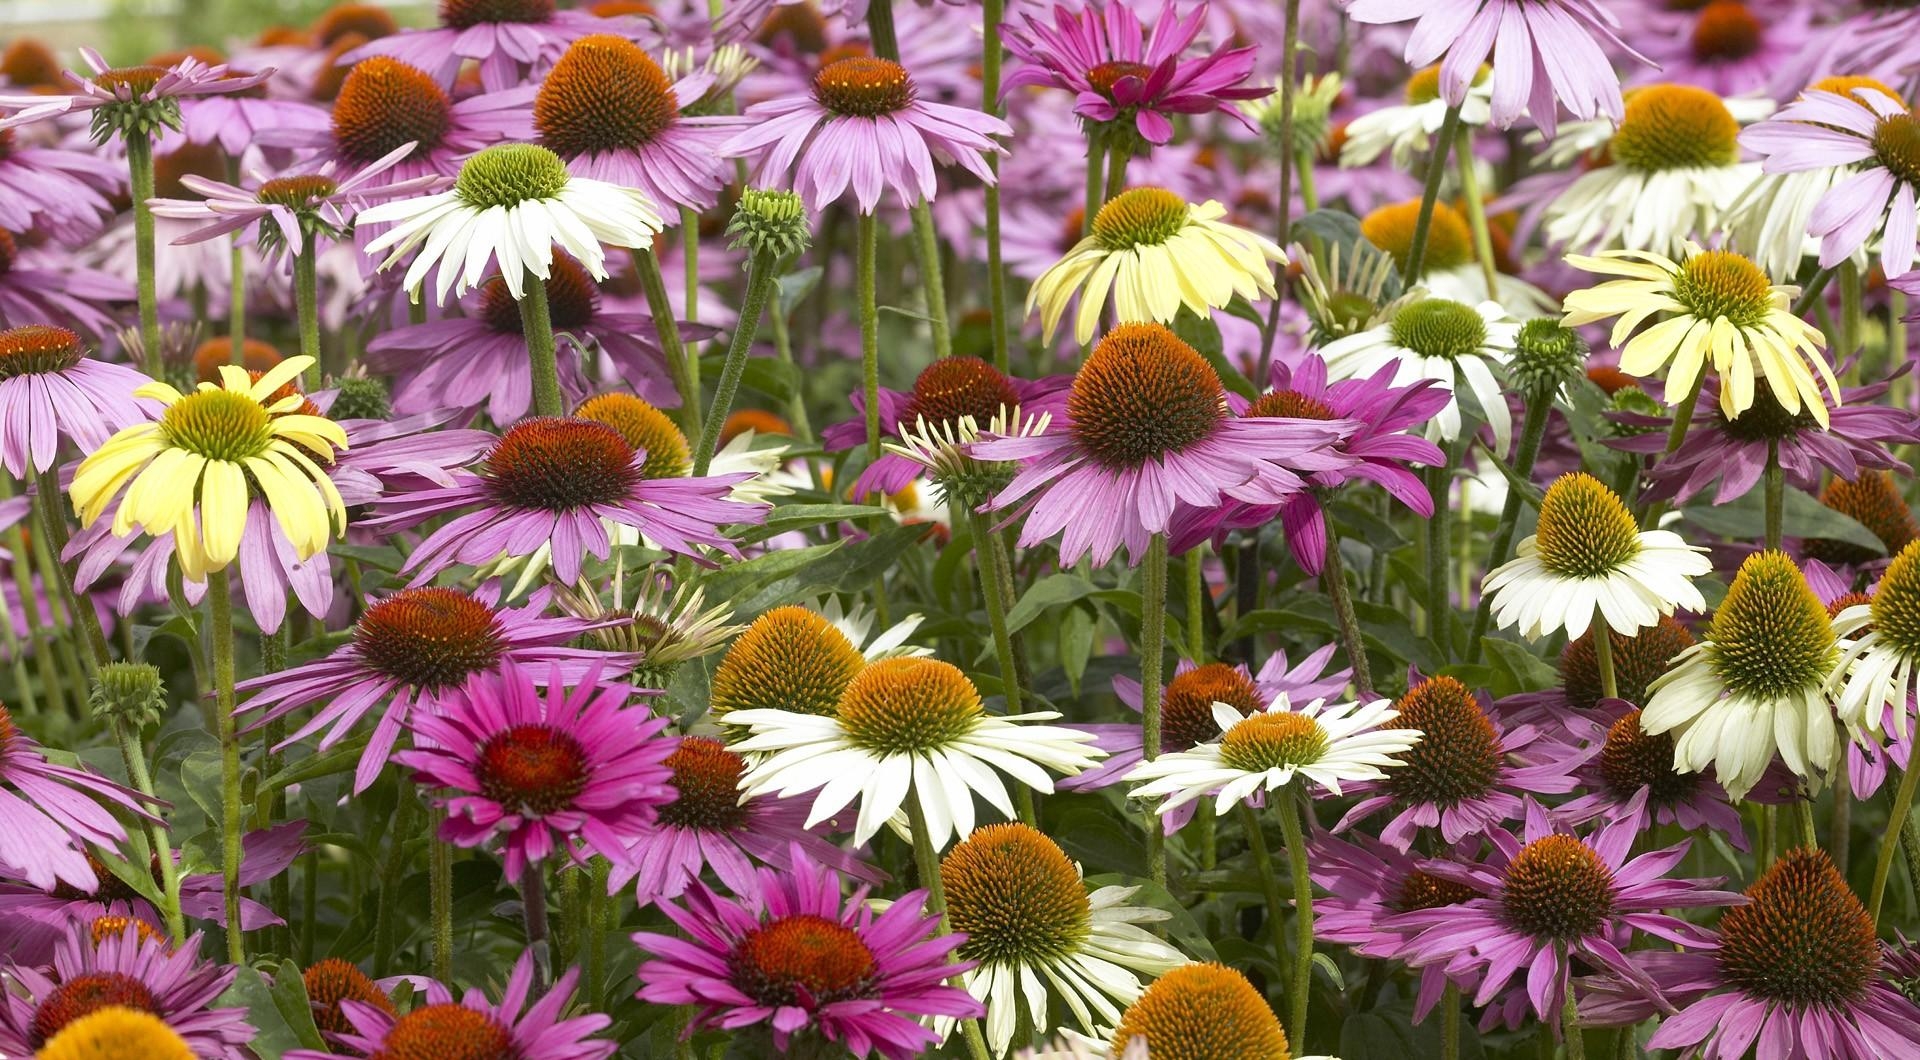 multicolored, flowers, flower bed, flowerbed, colorful, echinacea